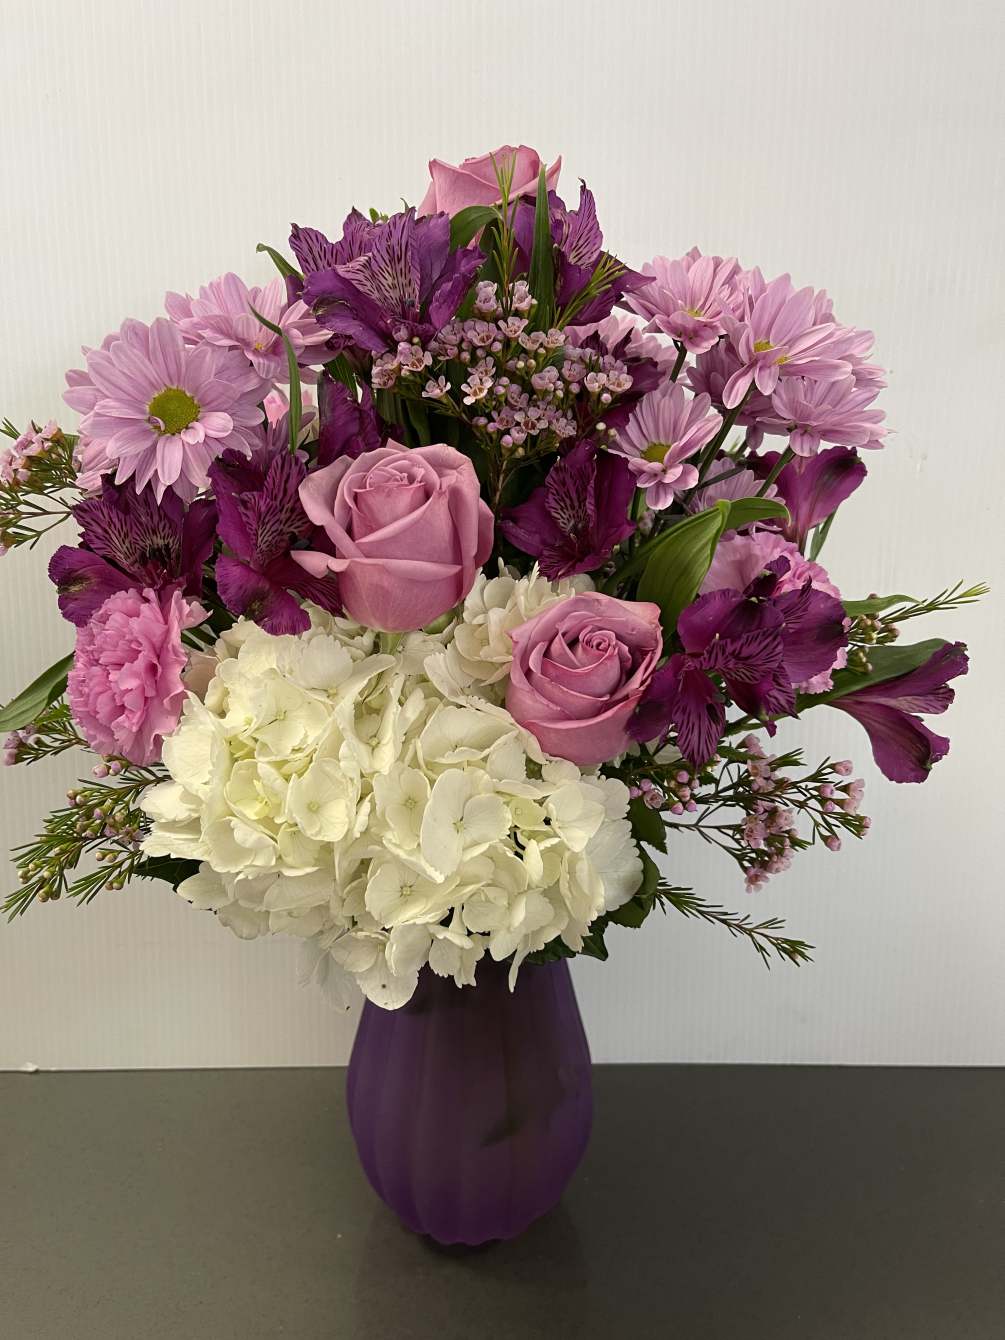 Frosted Lavender or Pink vase with Lavender and purple Flowers, 
Hydranges, roses